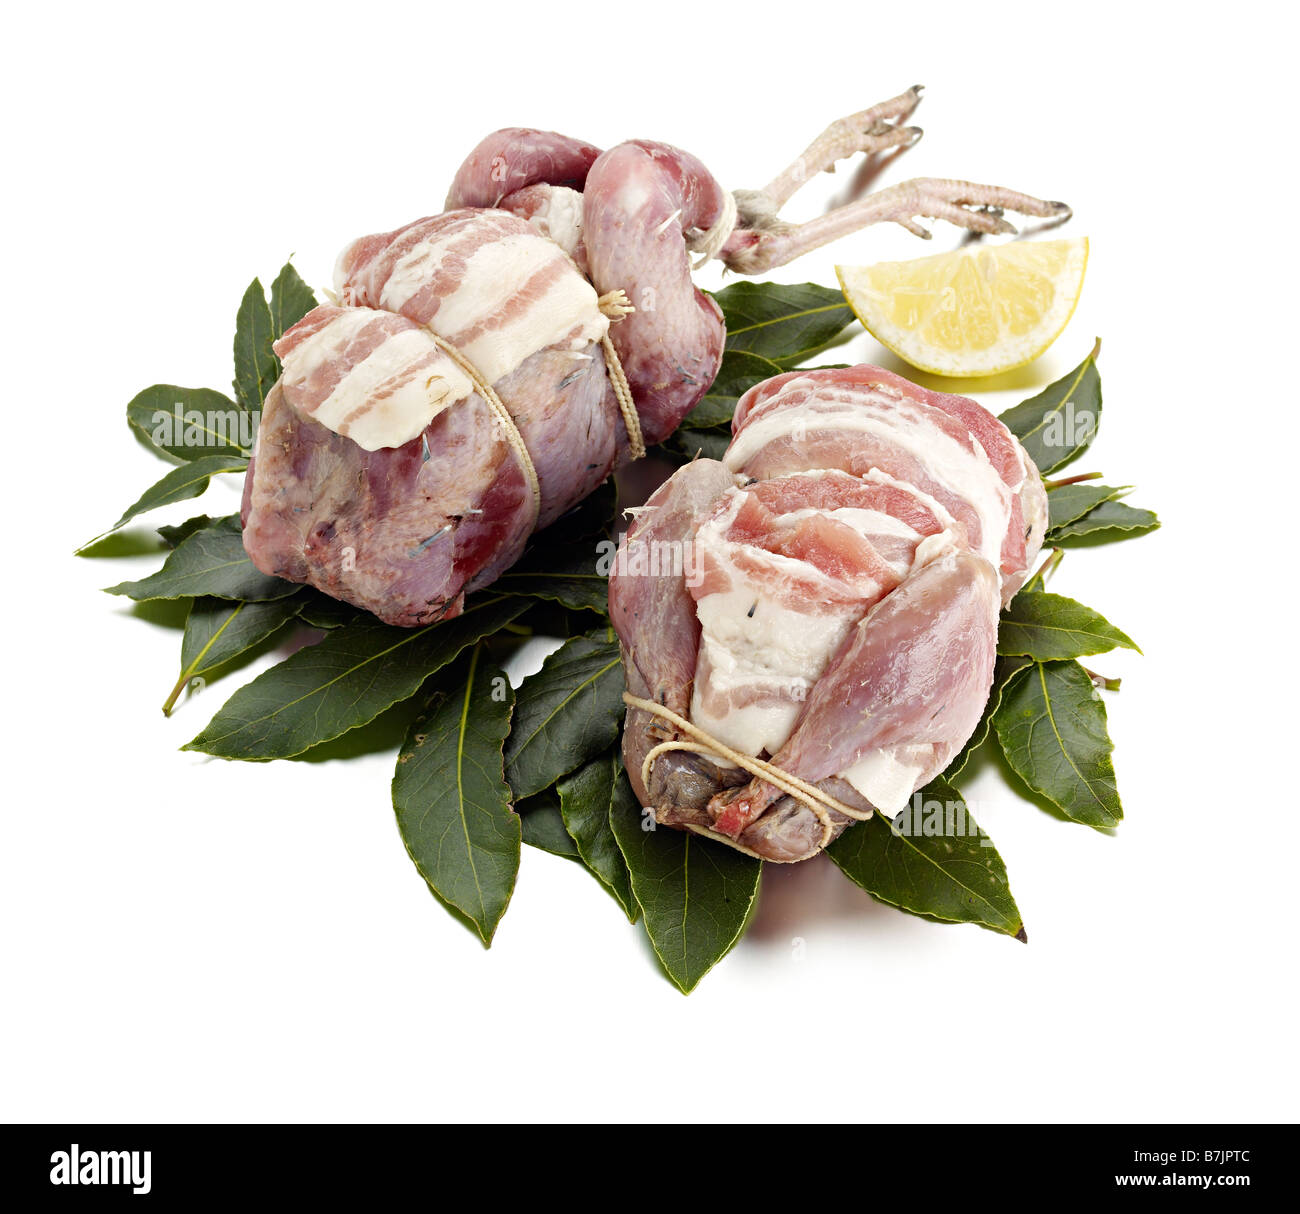 brace partridges prepared ready to bake bacon tied bay leaves Stock Photo